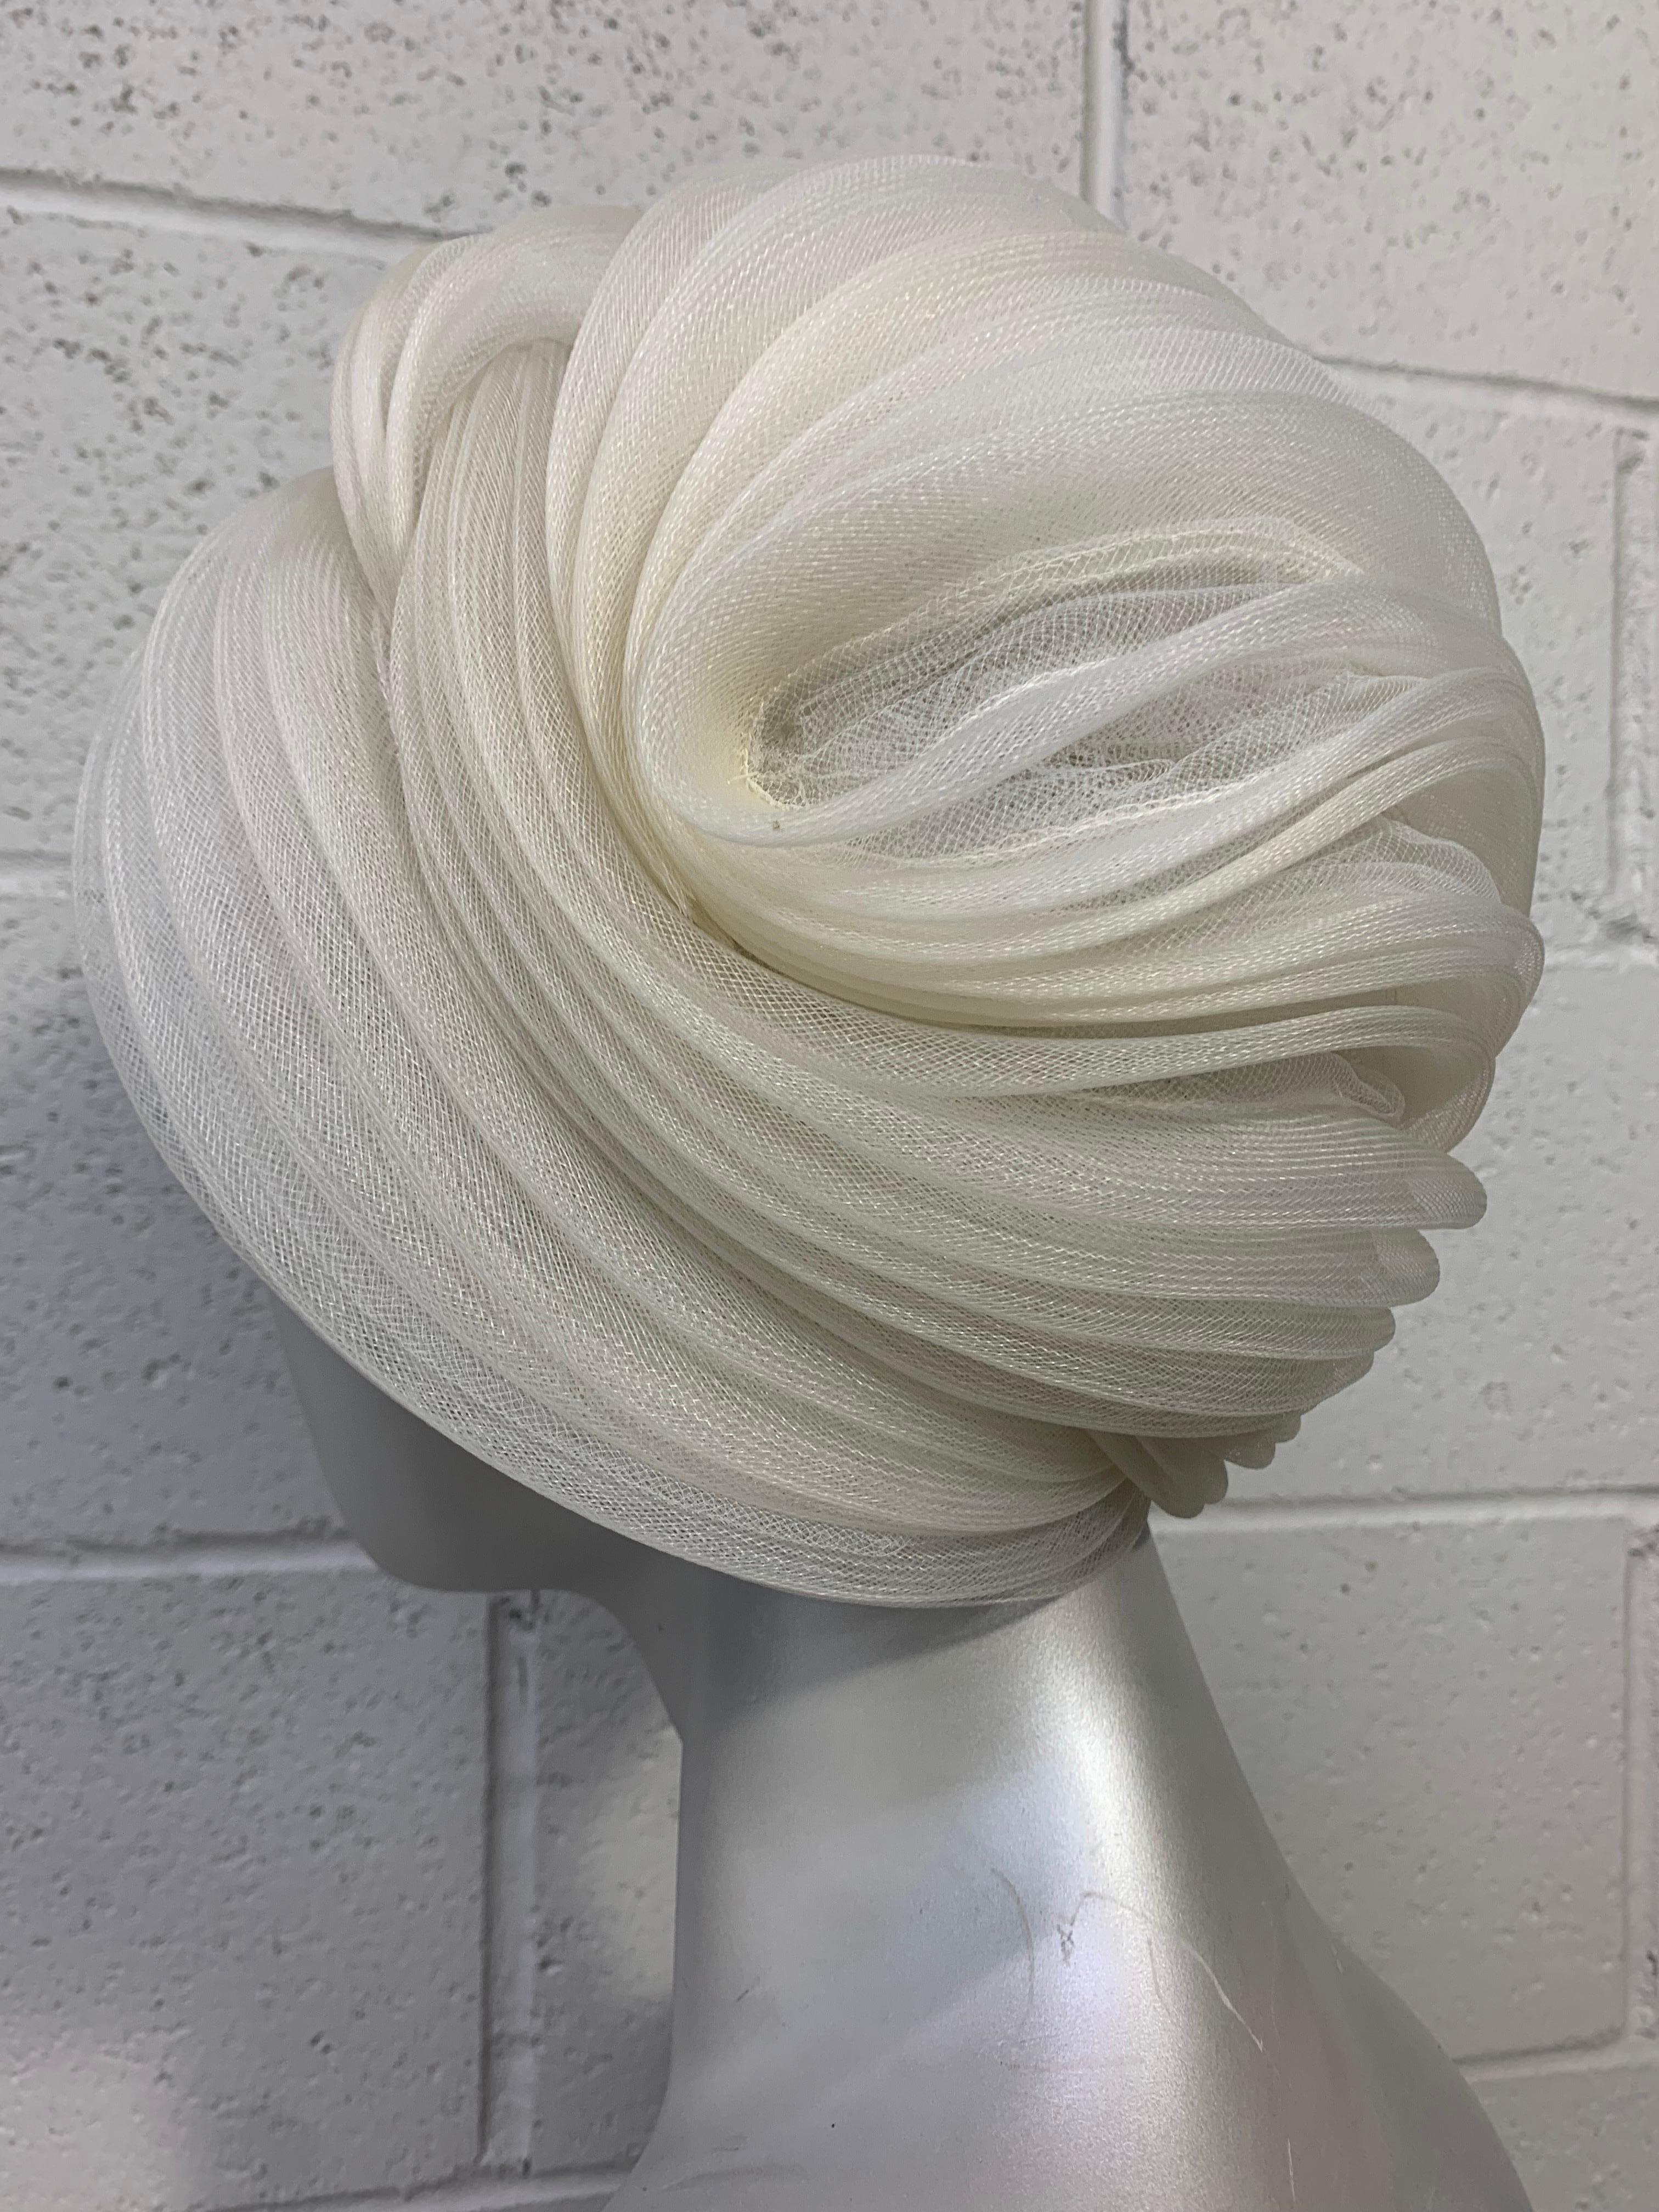 1960s Christian Dior Dramatic Snow White Coiled Tulle Turban  In Excellent Condition For Sale In Gresham, OR